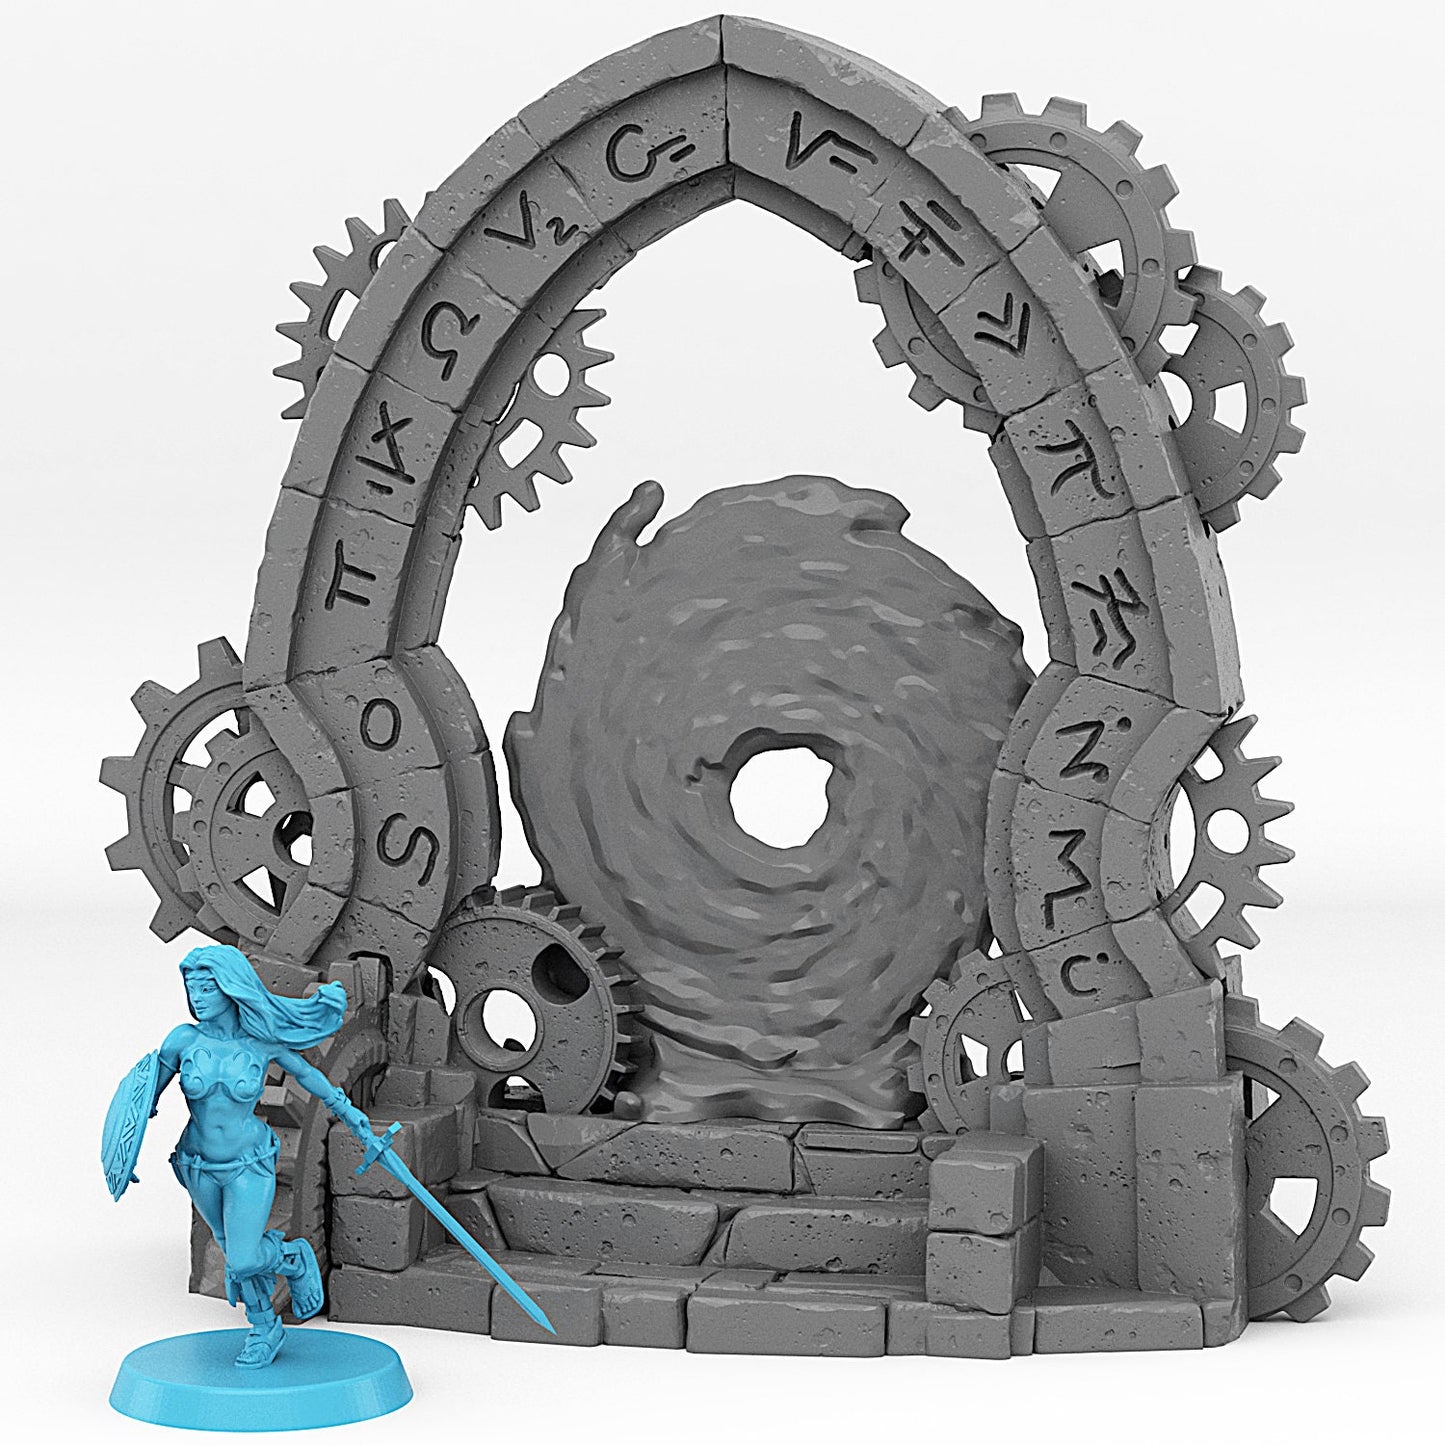 Clockwork Portal | Scenery and terrain | 3D Printed Resin Miniature | Tabletop Role Playing | AoS | D&D | 40K | Pathfinder